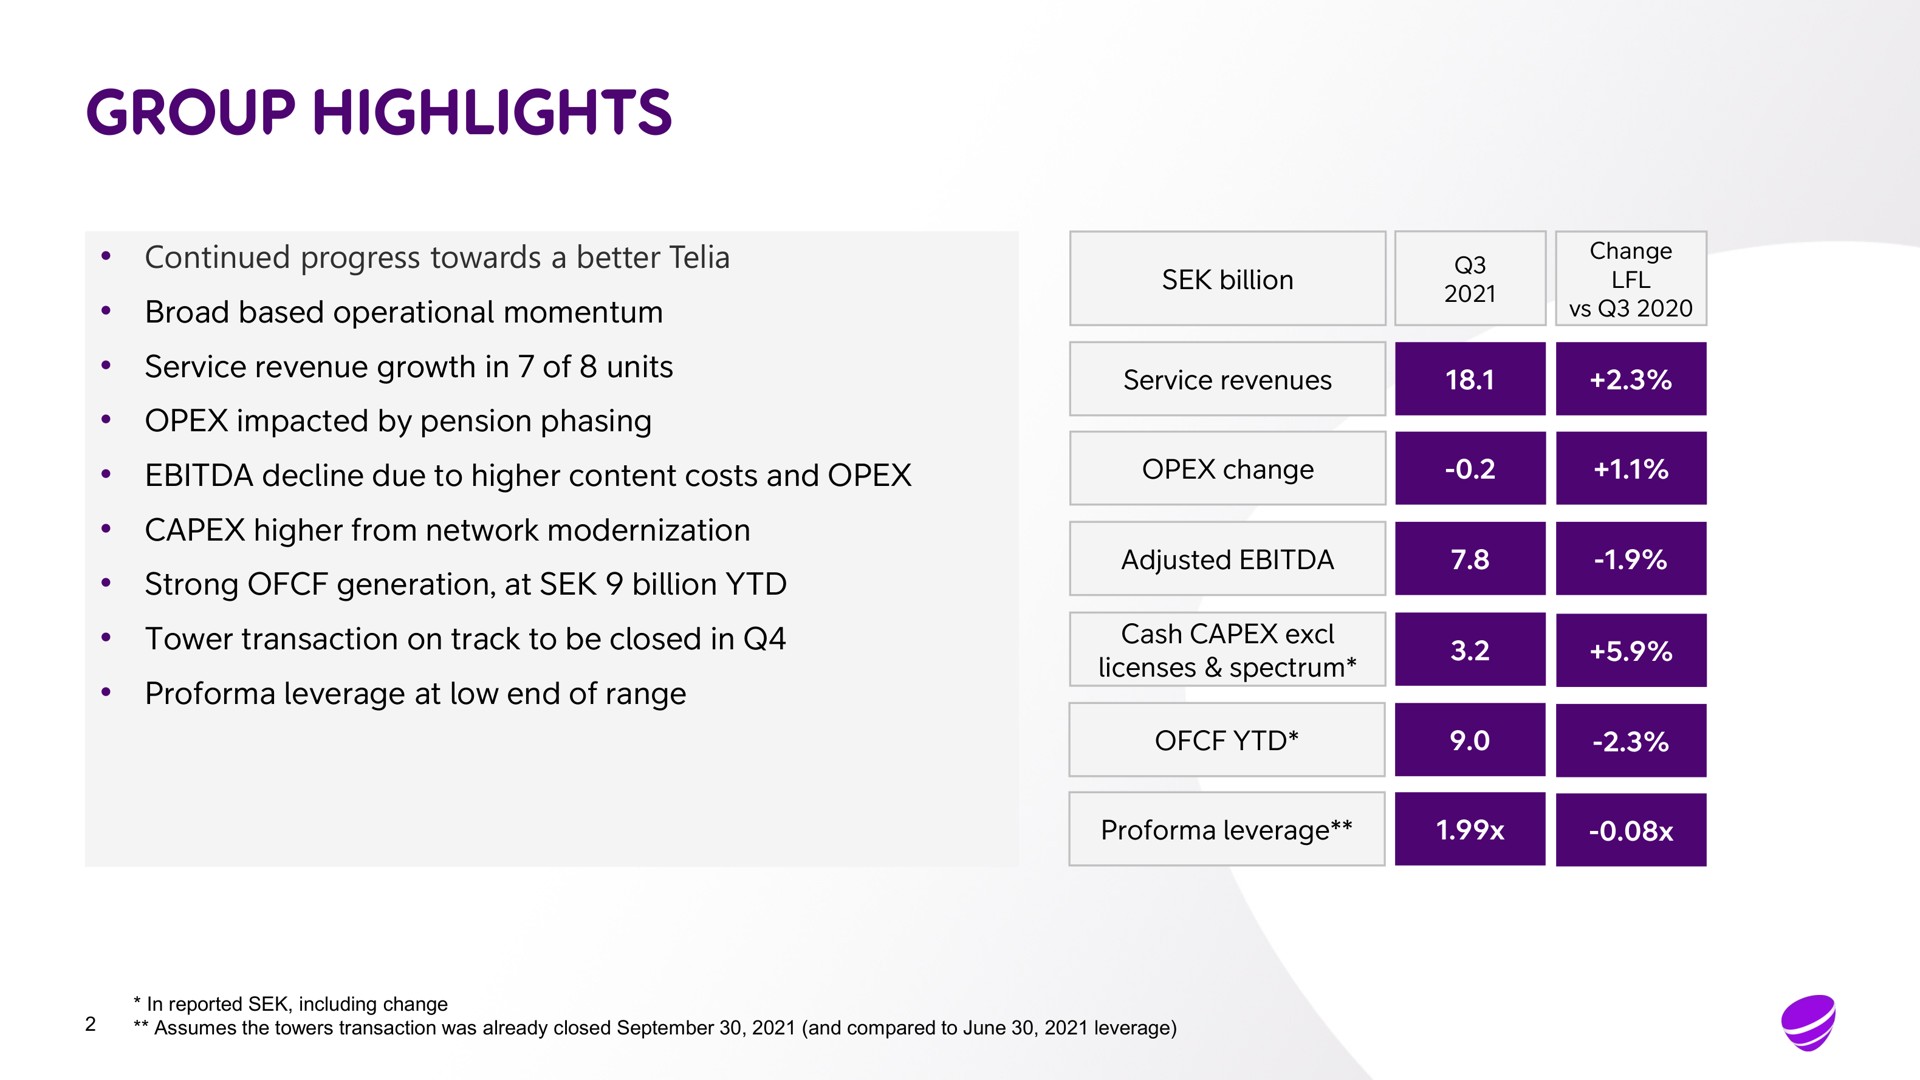 group highlights continued progress towards a better broad based operational momentum service revenue growth in of units impacted by pension phasing billion service revenues decline due to higher content costs and change higher from network modernization strong generation at billion tower transaction on track to be closed in leverage at low end of range adjusted cash licenses spectrum leverage | Telia Company